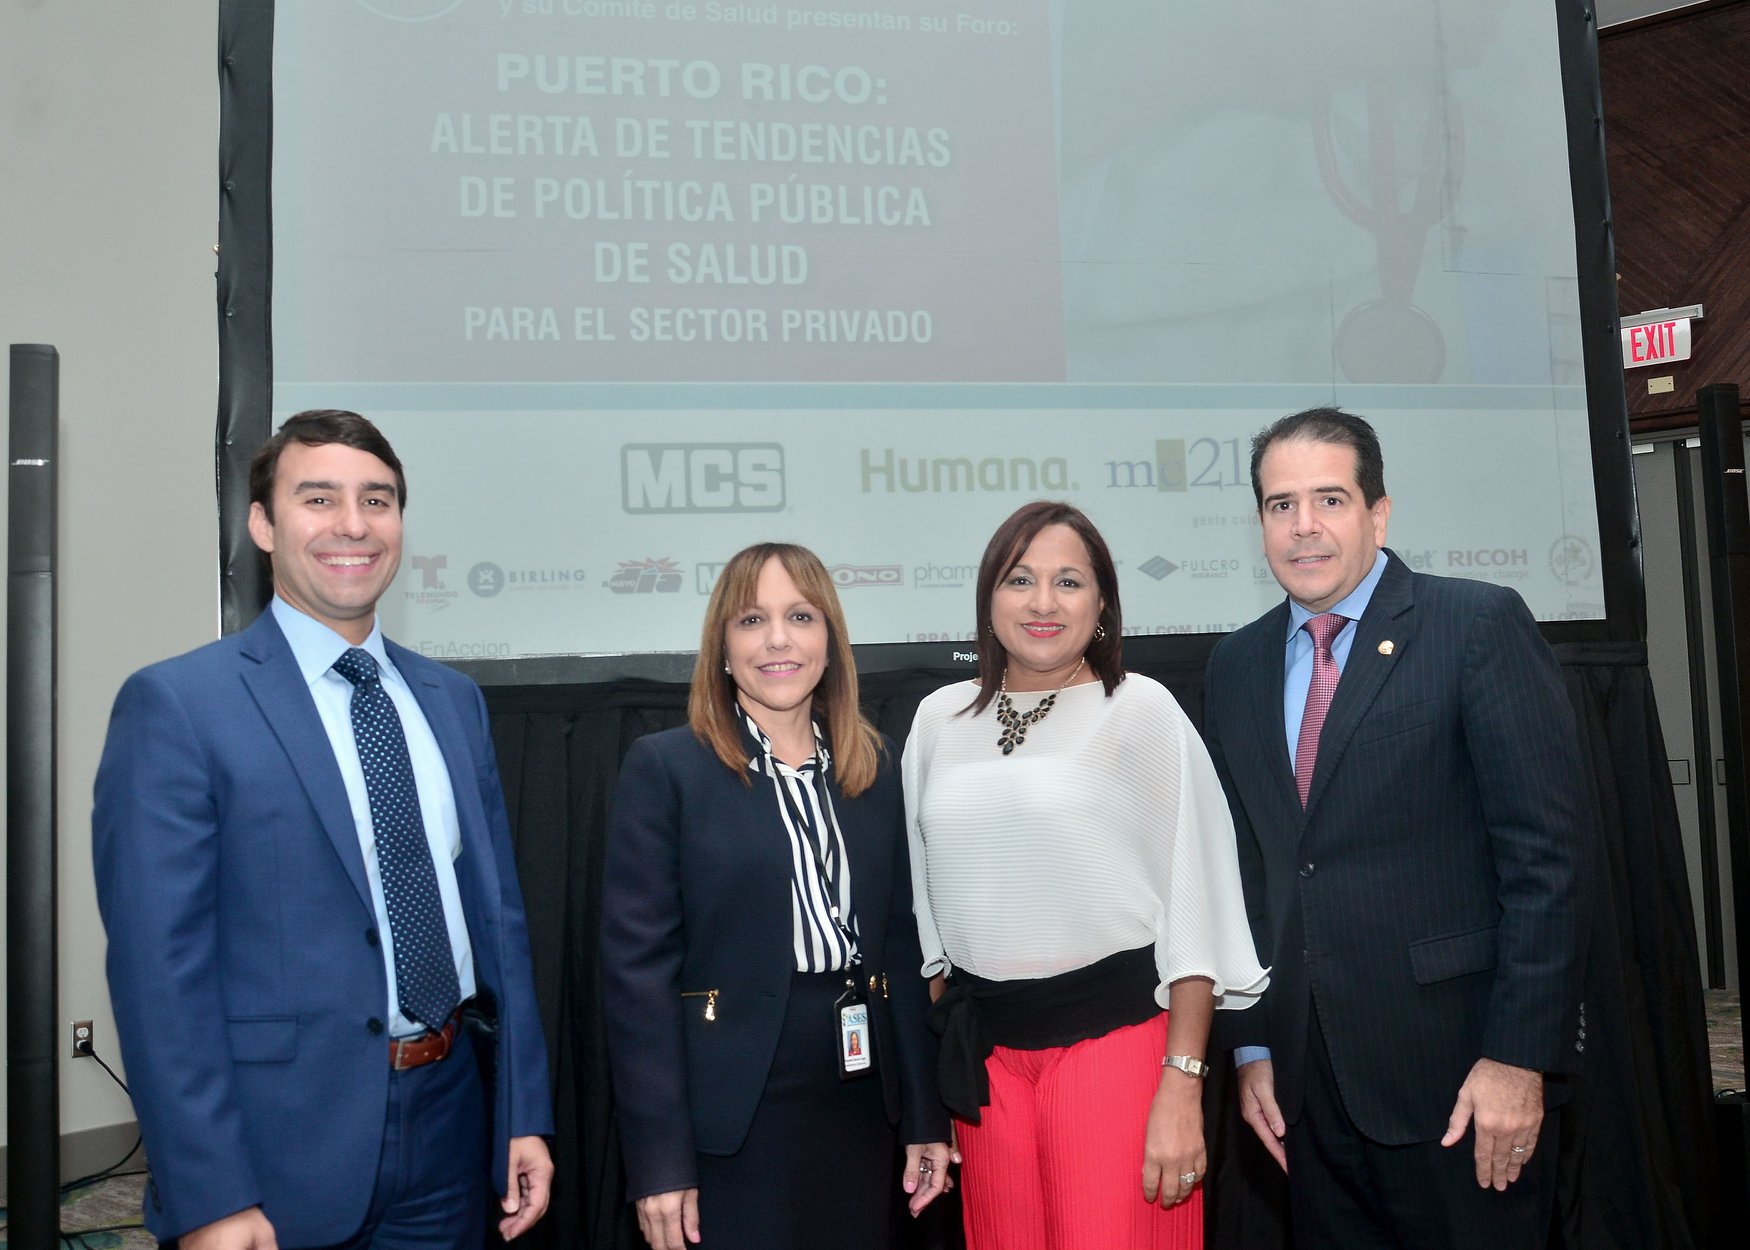 Nayda Rivera, Executive Director of ASES, Yolanda García-Lugo, and Alejandro Drevón, General Manager of Abbvie.Abarcan Nayda Rivera was selected to lead the panel on “Puerto Rico: Public Health Policy Trends Alerts for the Private Sector” at the 2019 Puerto Rico Health Forum